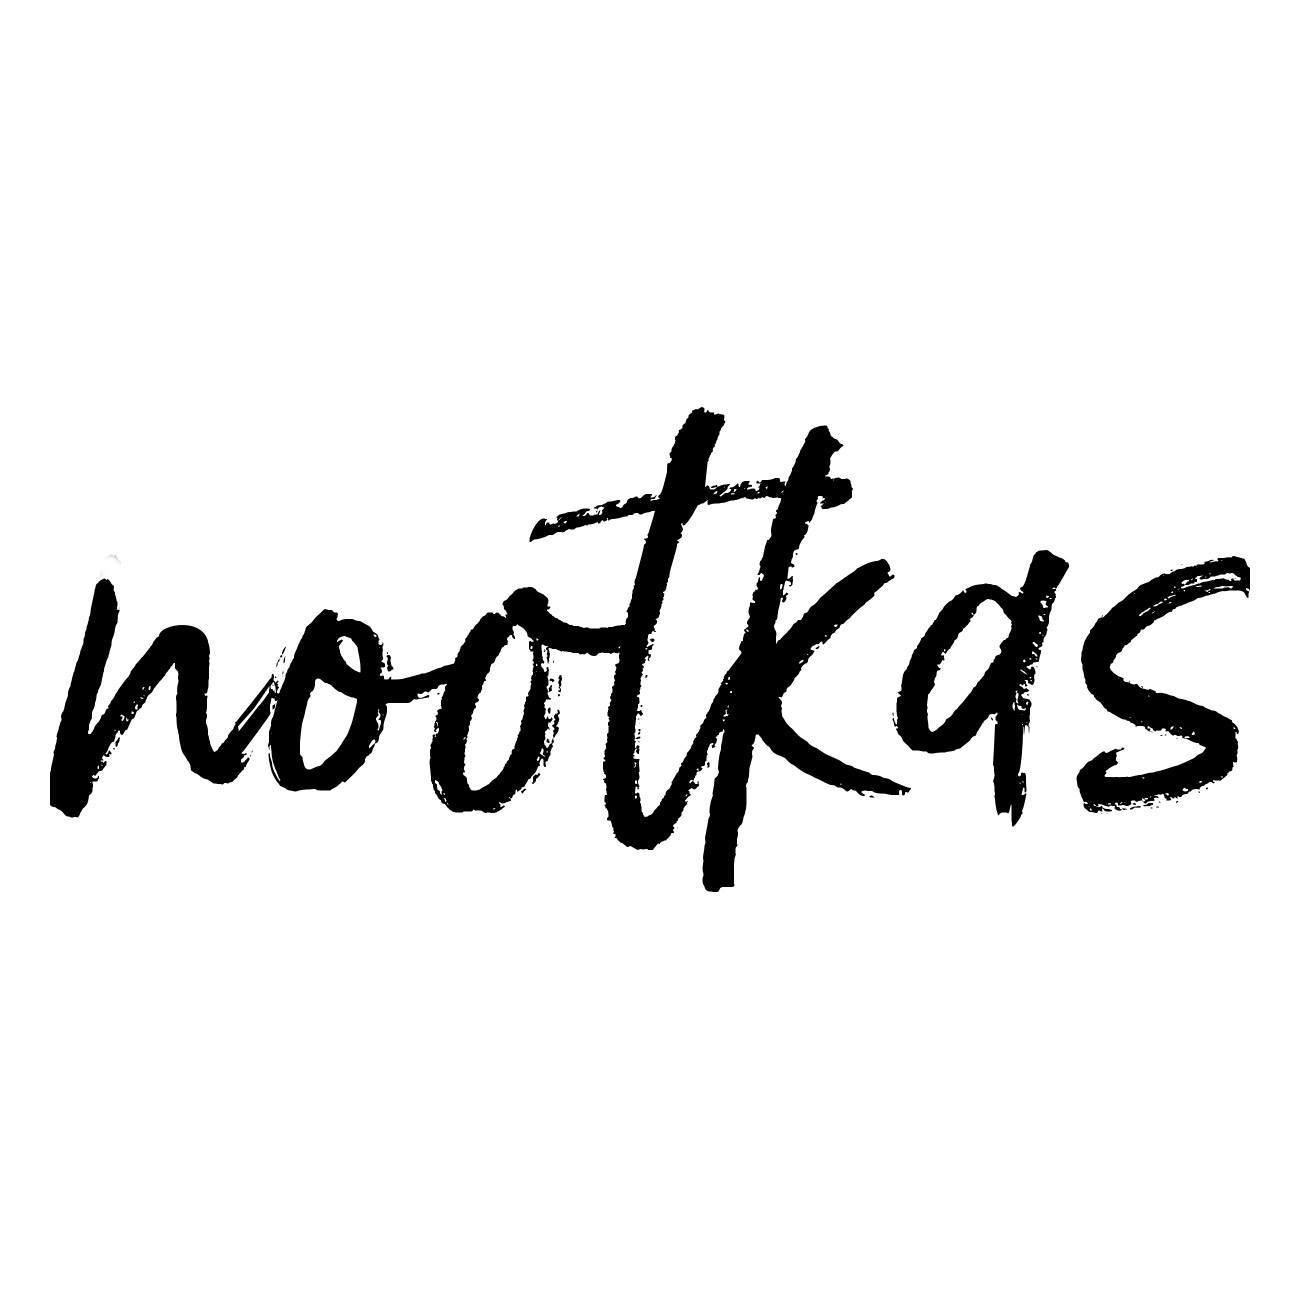 Nootkas is one of the best wool slipper providers in the US and Canada.